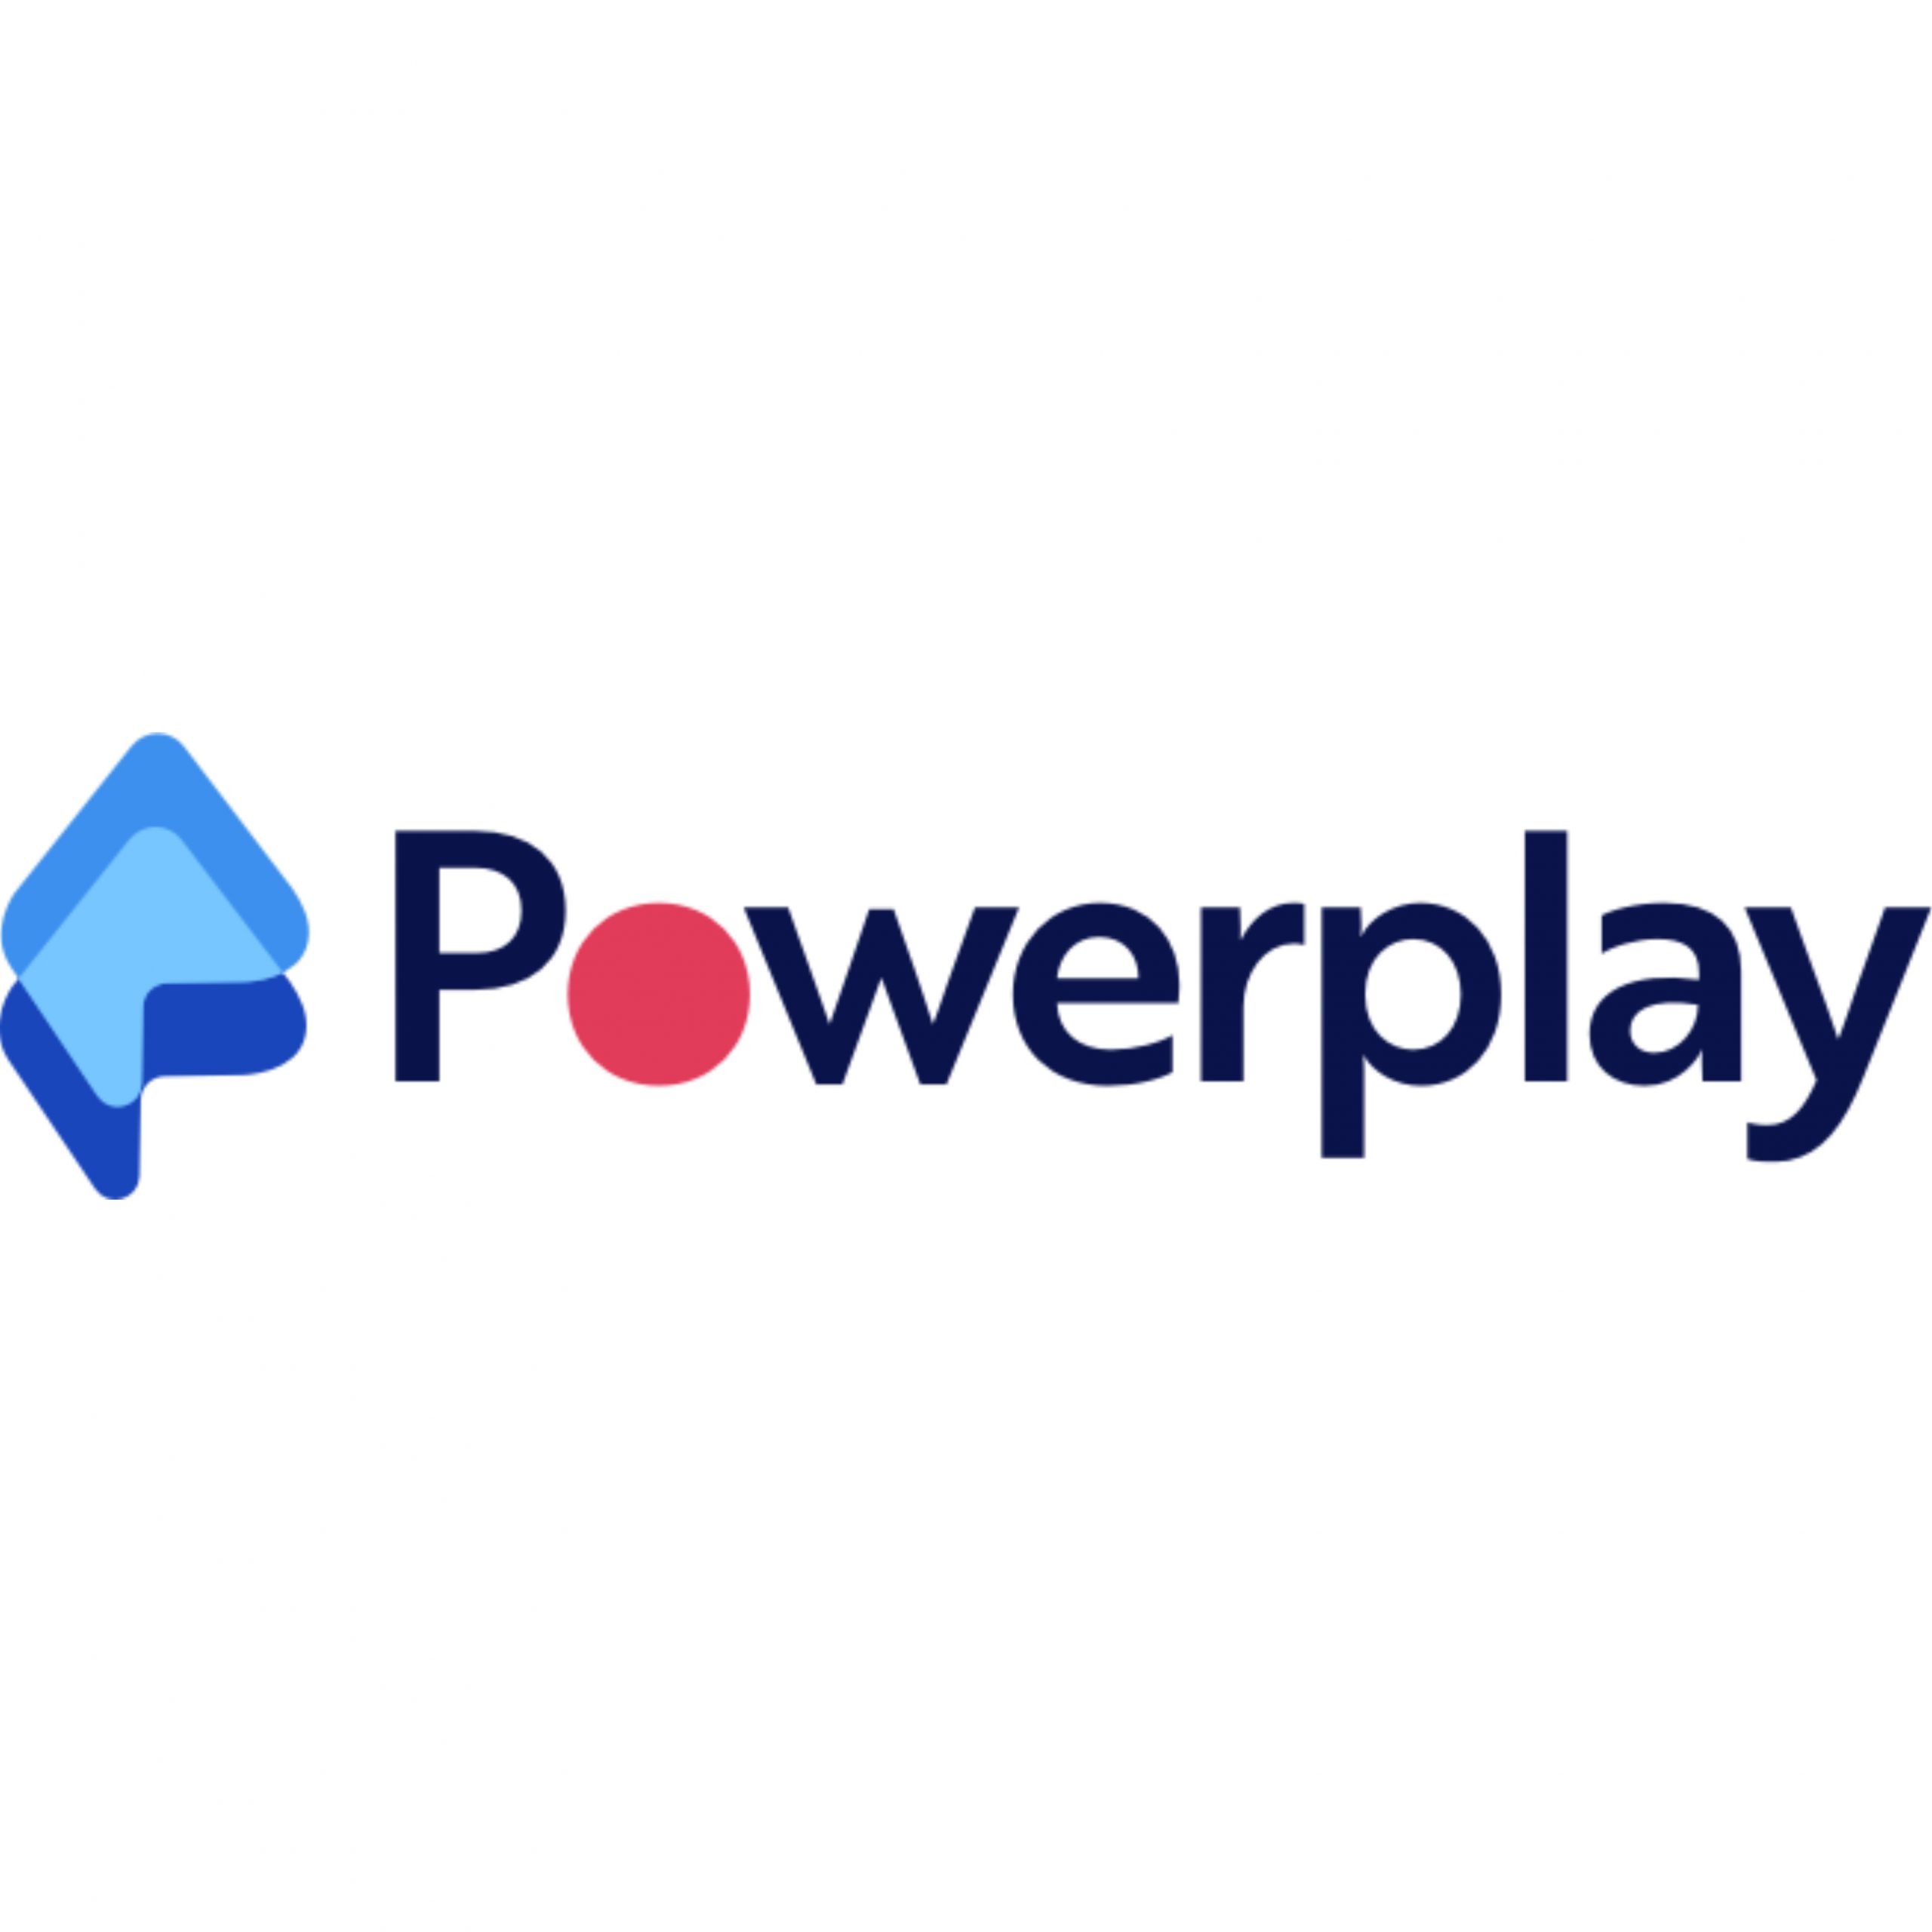 Powerplay, India’s 1st & leading construction management software, announces to expand globally & hire upto 100 people in FY23-thumnail